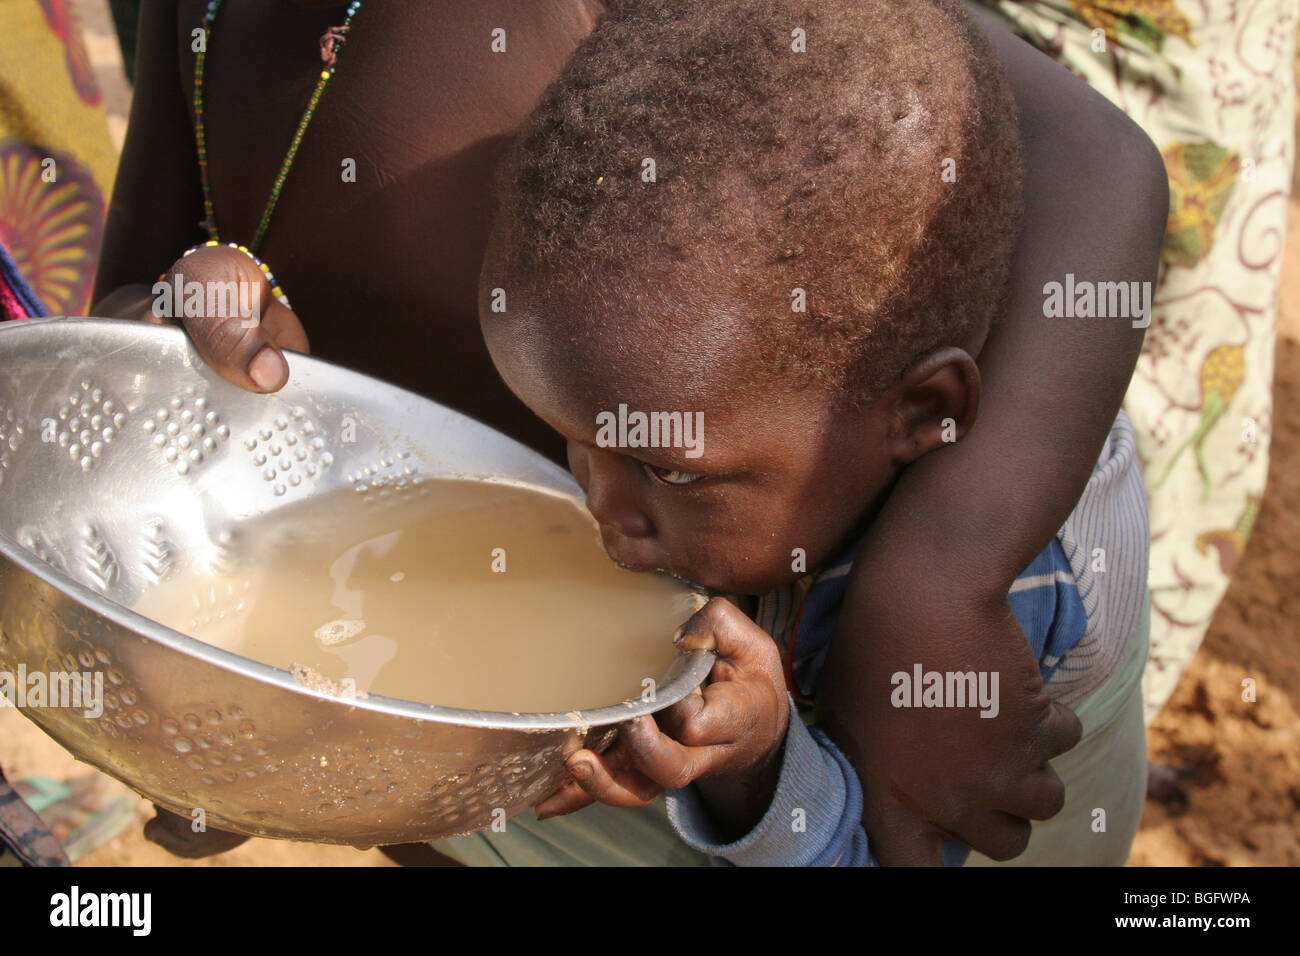 A young child drinking dirty water collected from a dry river bed in Burkina Faso, West Africa Stock Photo